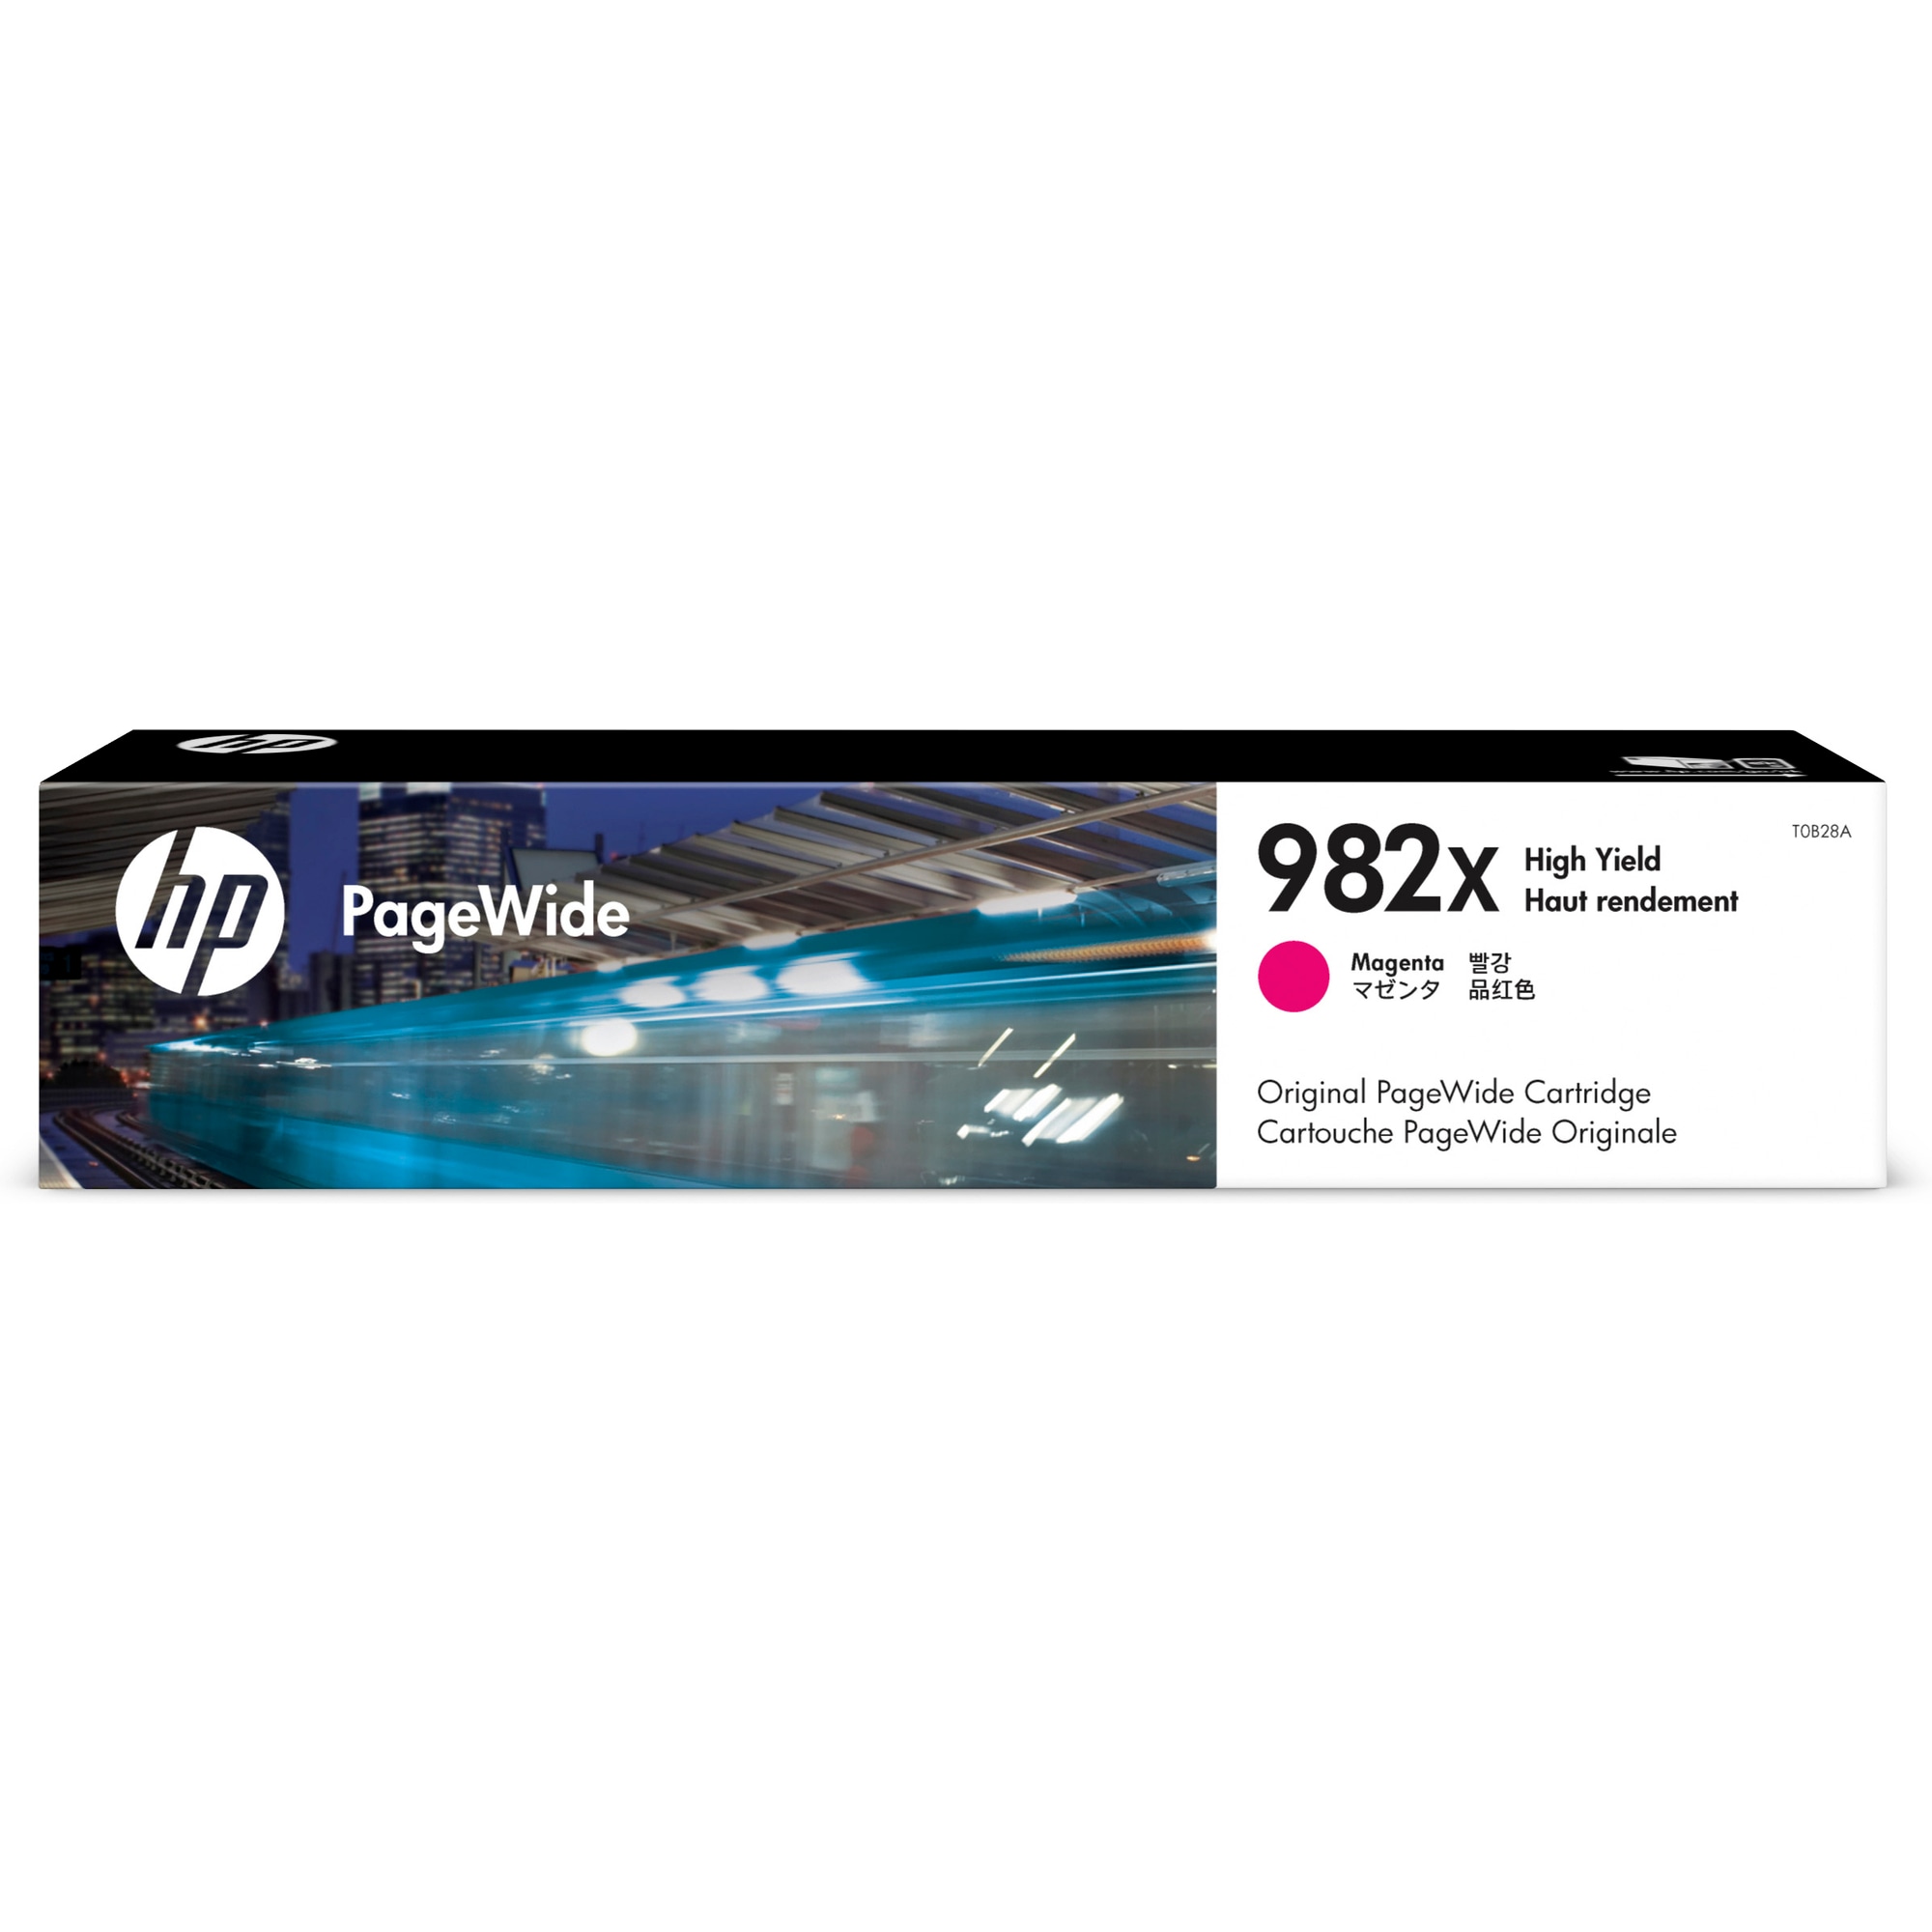 HP 982X High Yield Magenta Original PageWide Cartridge (16,000 pages)0 